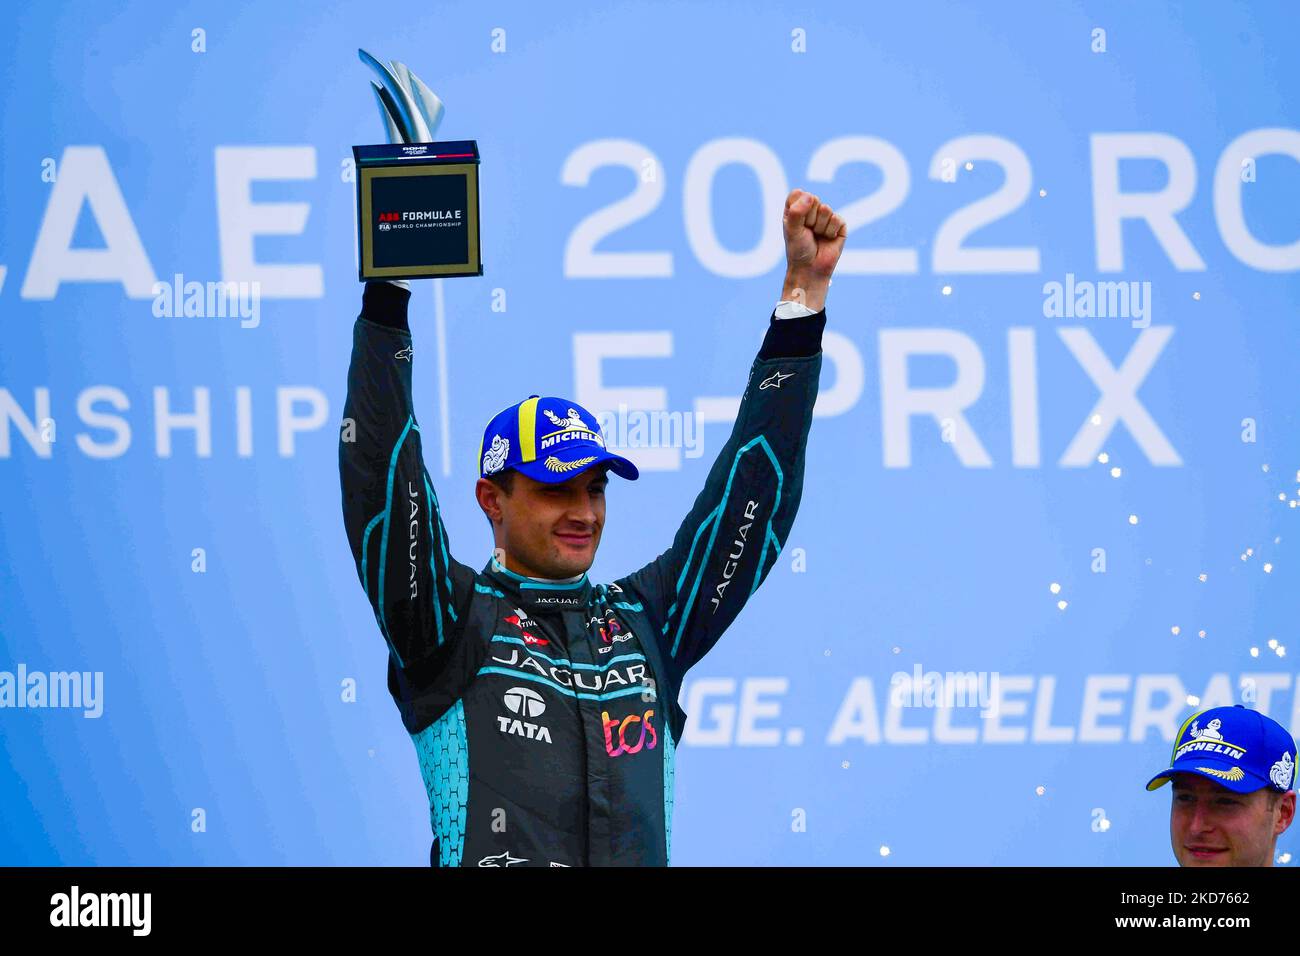 Mitch Evans of Jaguar tcs Racing on podium during celebration of Rome E-Prix, 4th round of Formula E World Championship in city circuit of Rome, EUR neighborhood Rome, 9 April 2022 (Photo by Andrea Diodato/NurPhoto) Stock Photo